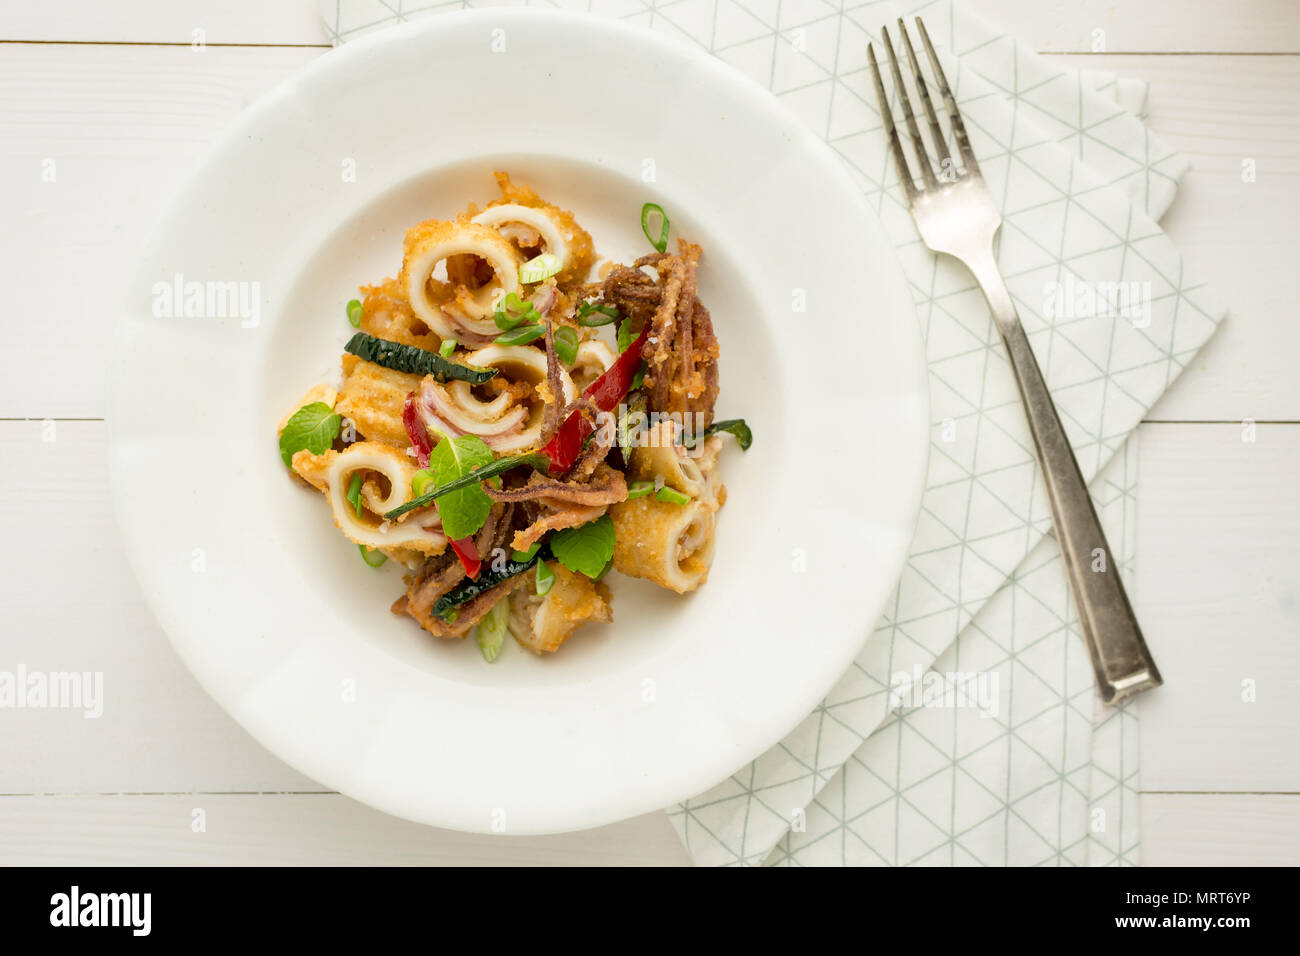 Fried Squids Tentacle Calamari with Chili Pepper and Mint Leaves Stock Photo